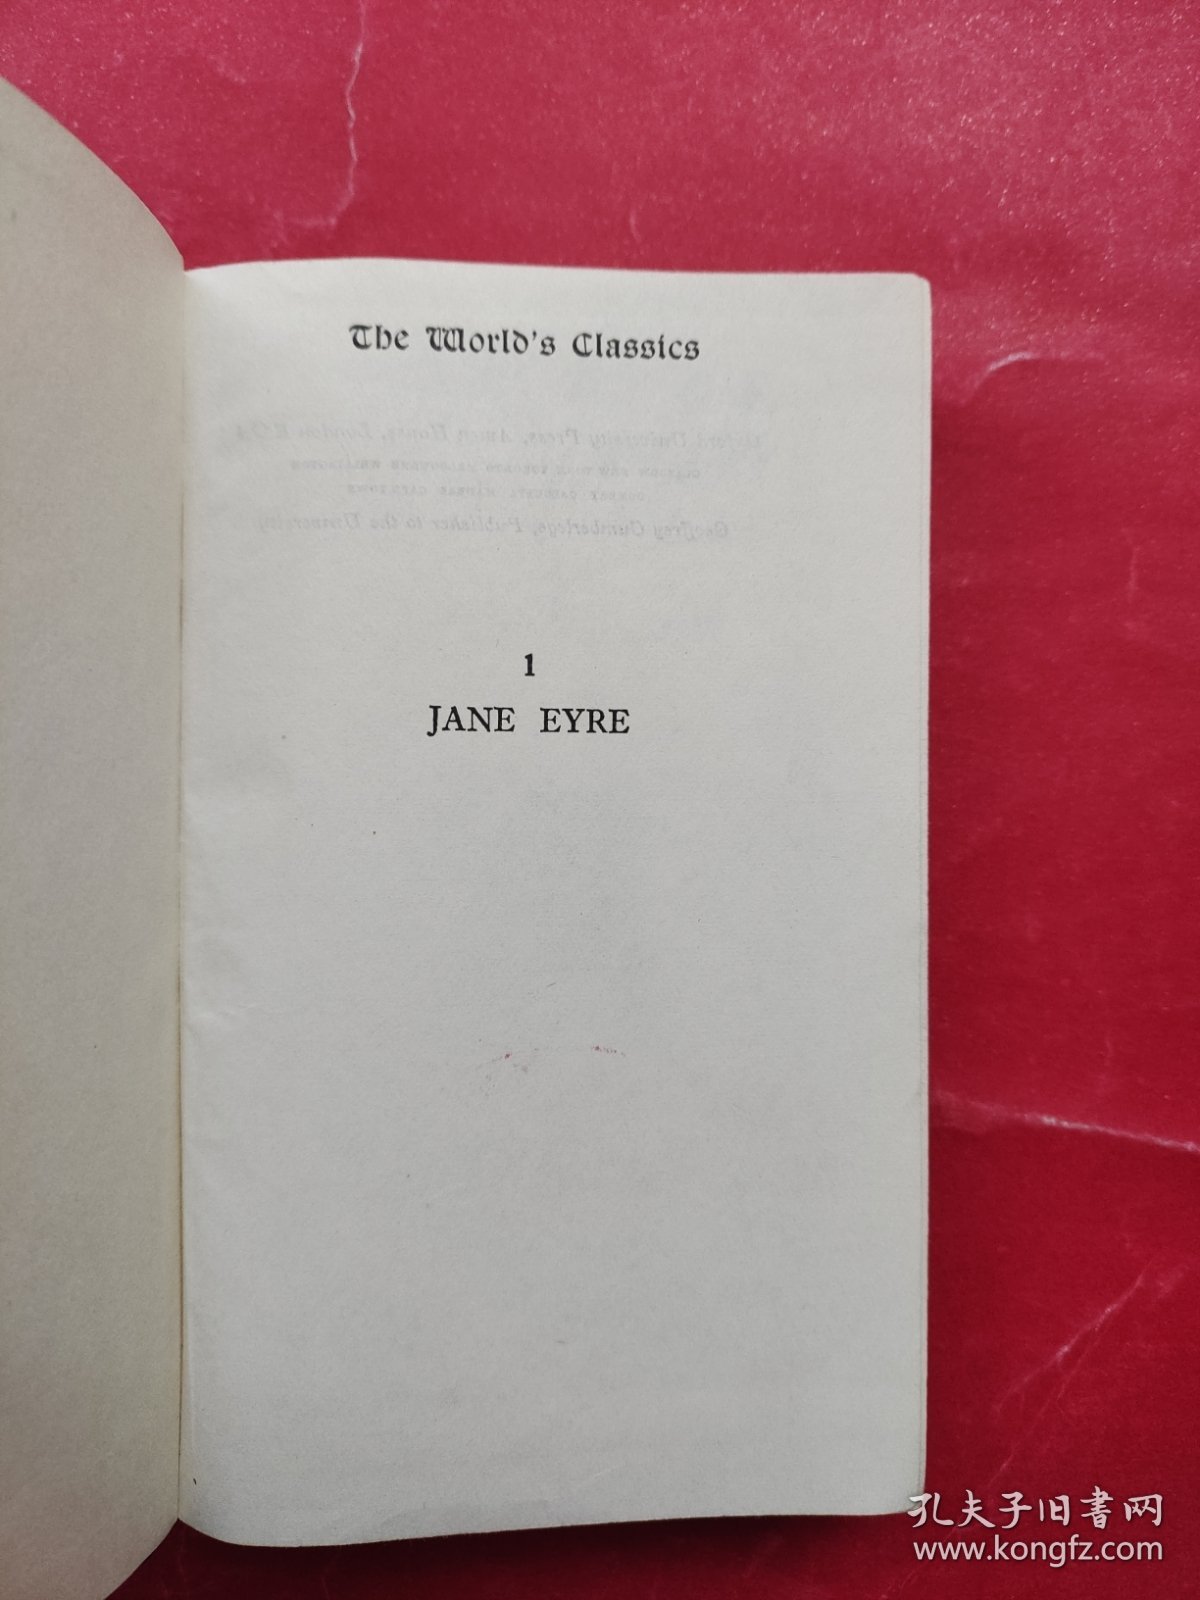 JANE EYRE An Autobiography 1